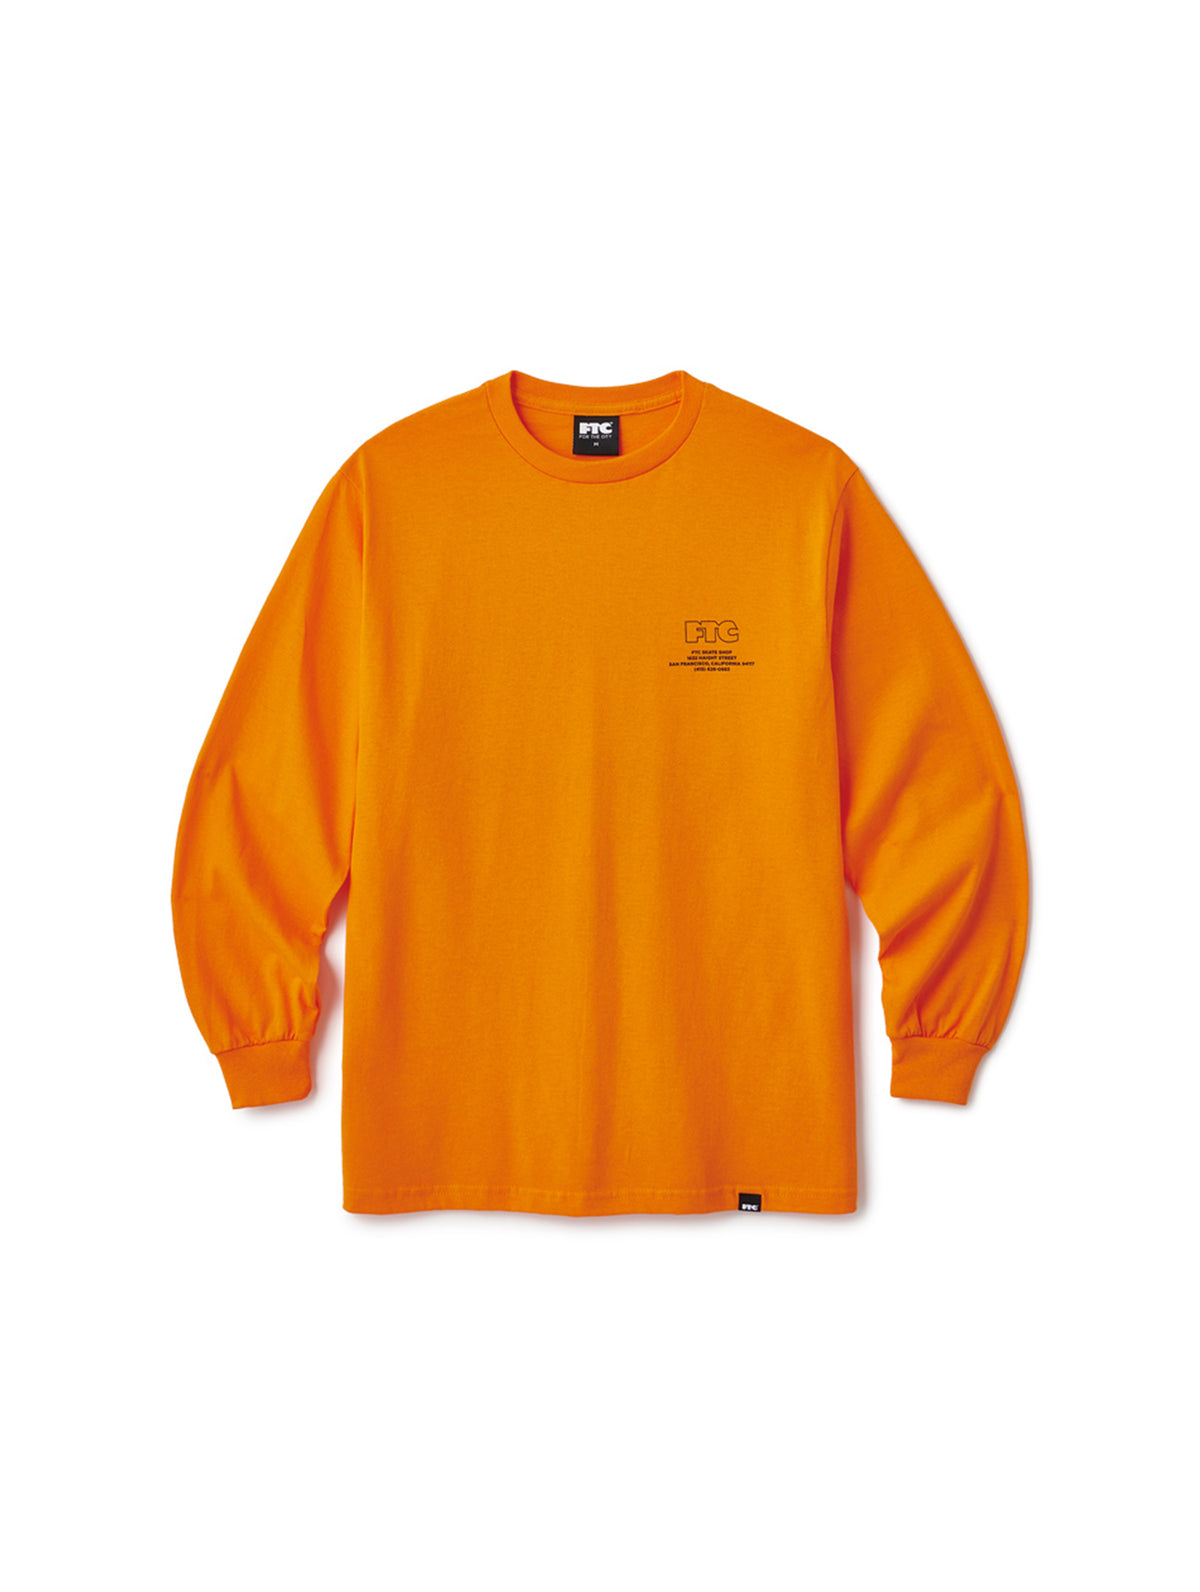 FTC STORE FRONT L/S TEE